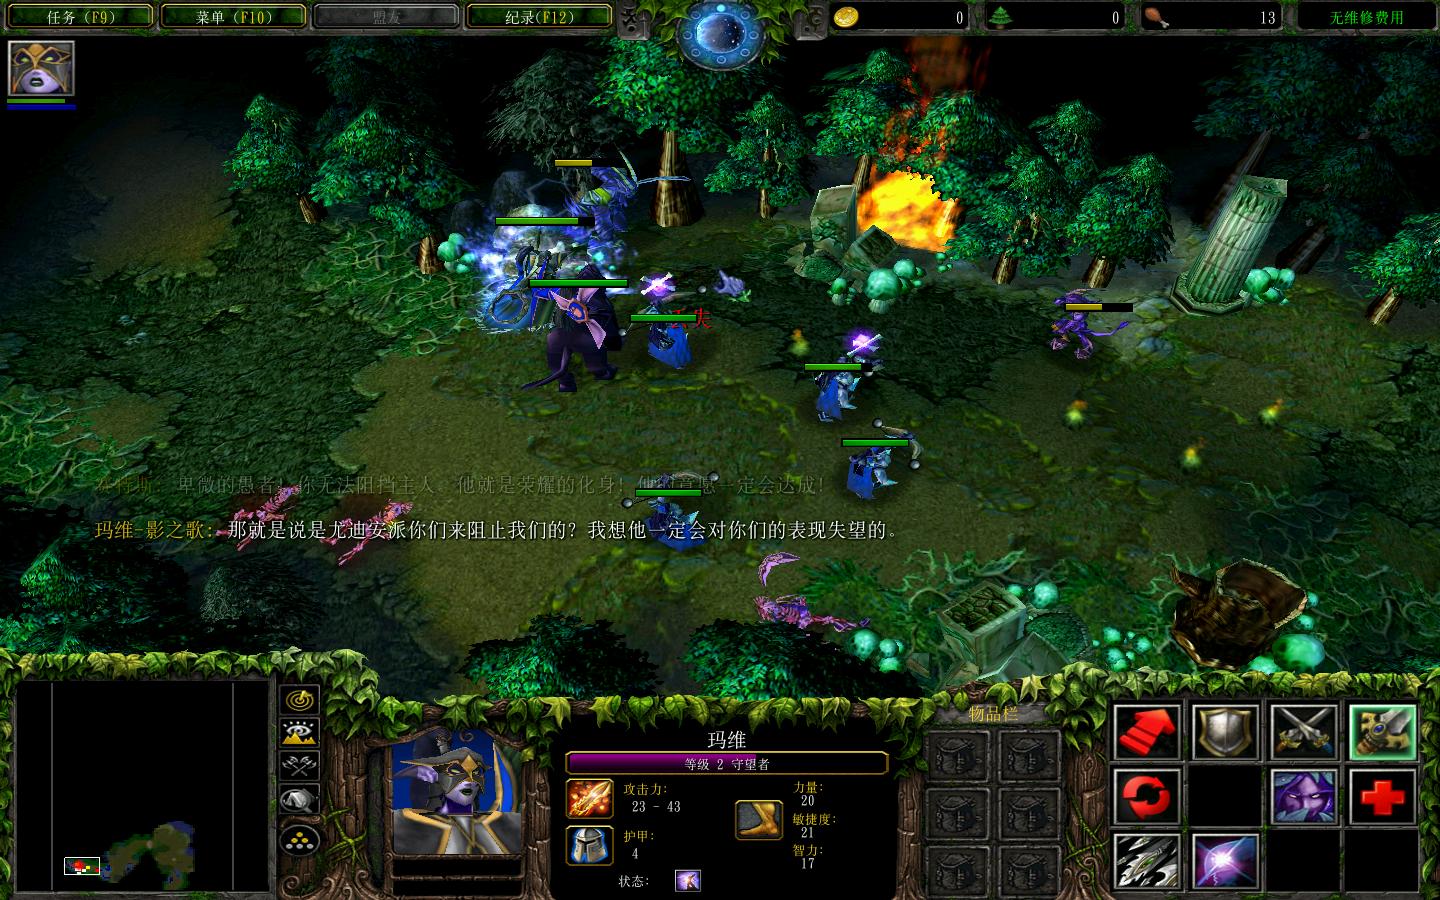 ħ3Warcraft III The Frozen Thronev1.24衤ʽv2.0ְ